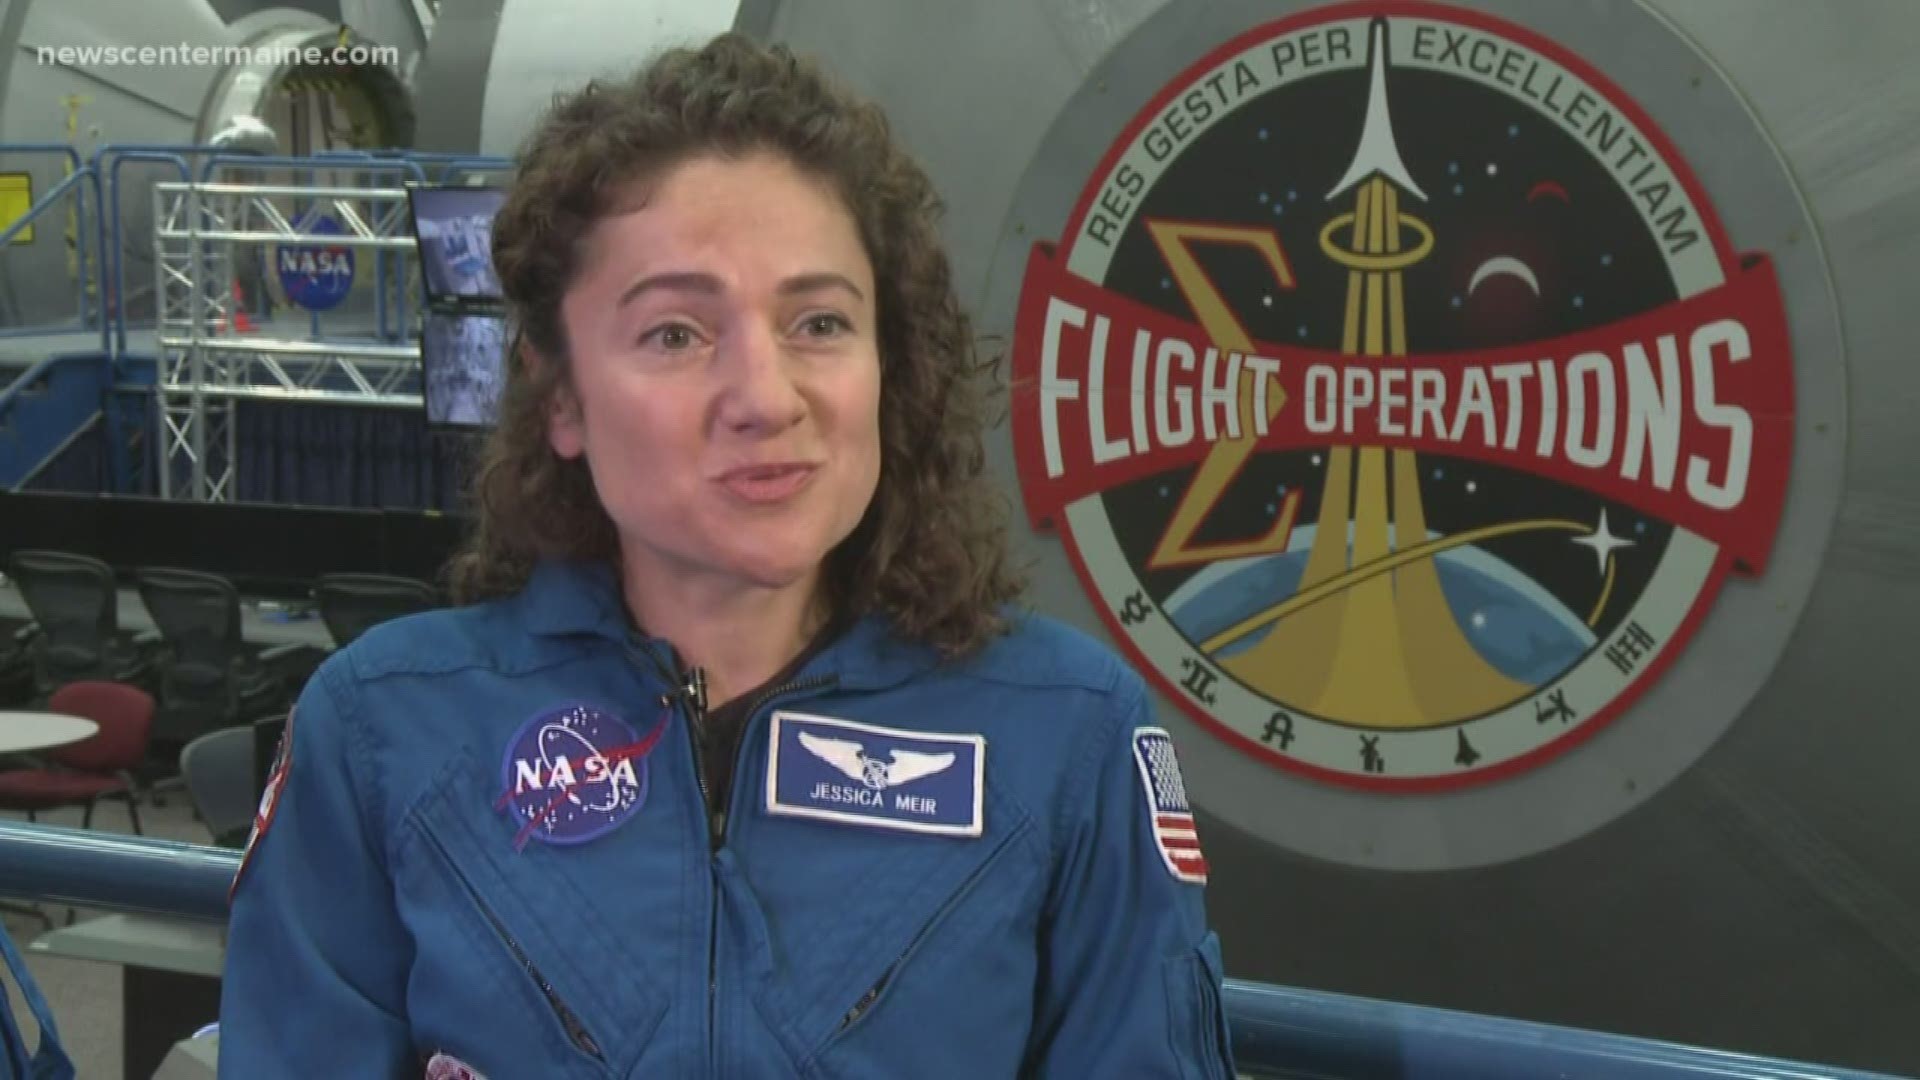 The first all-female spacewalk with Maine astronaut Jessica Meir has been delayed.